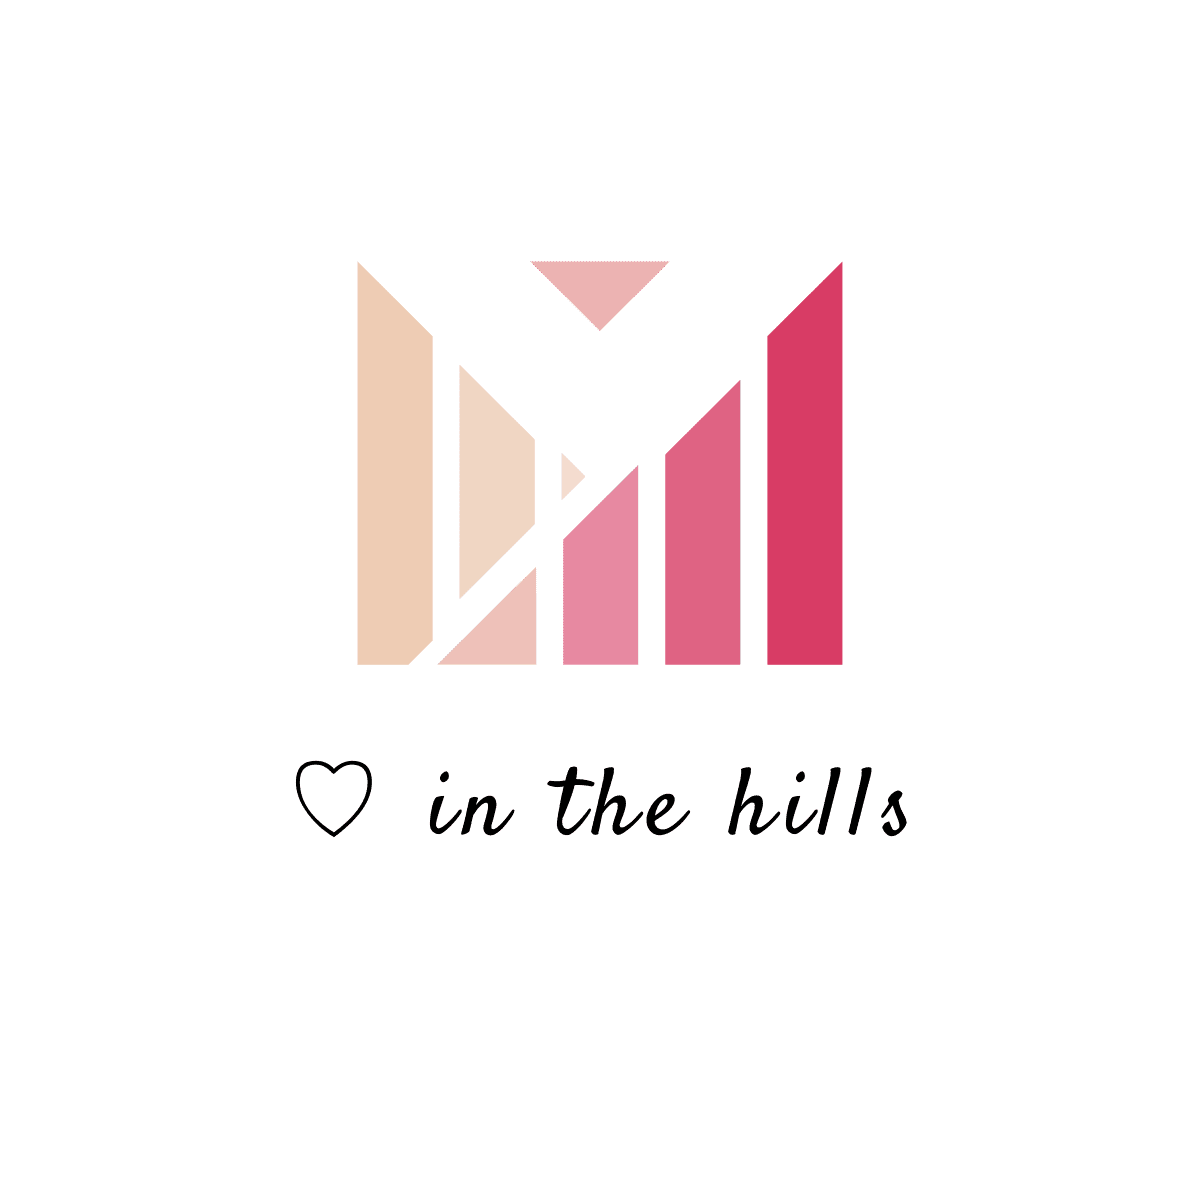 Heart in the hills